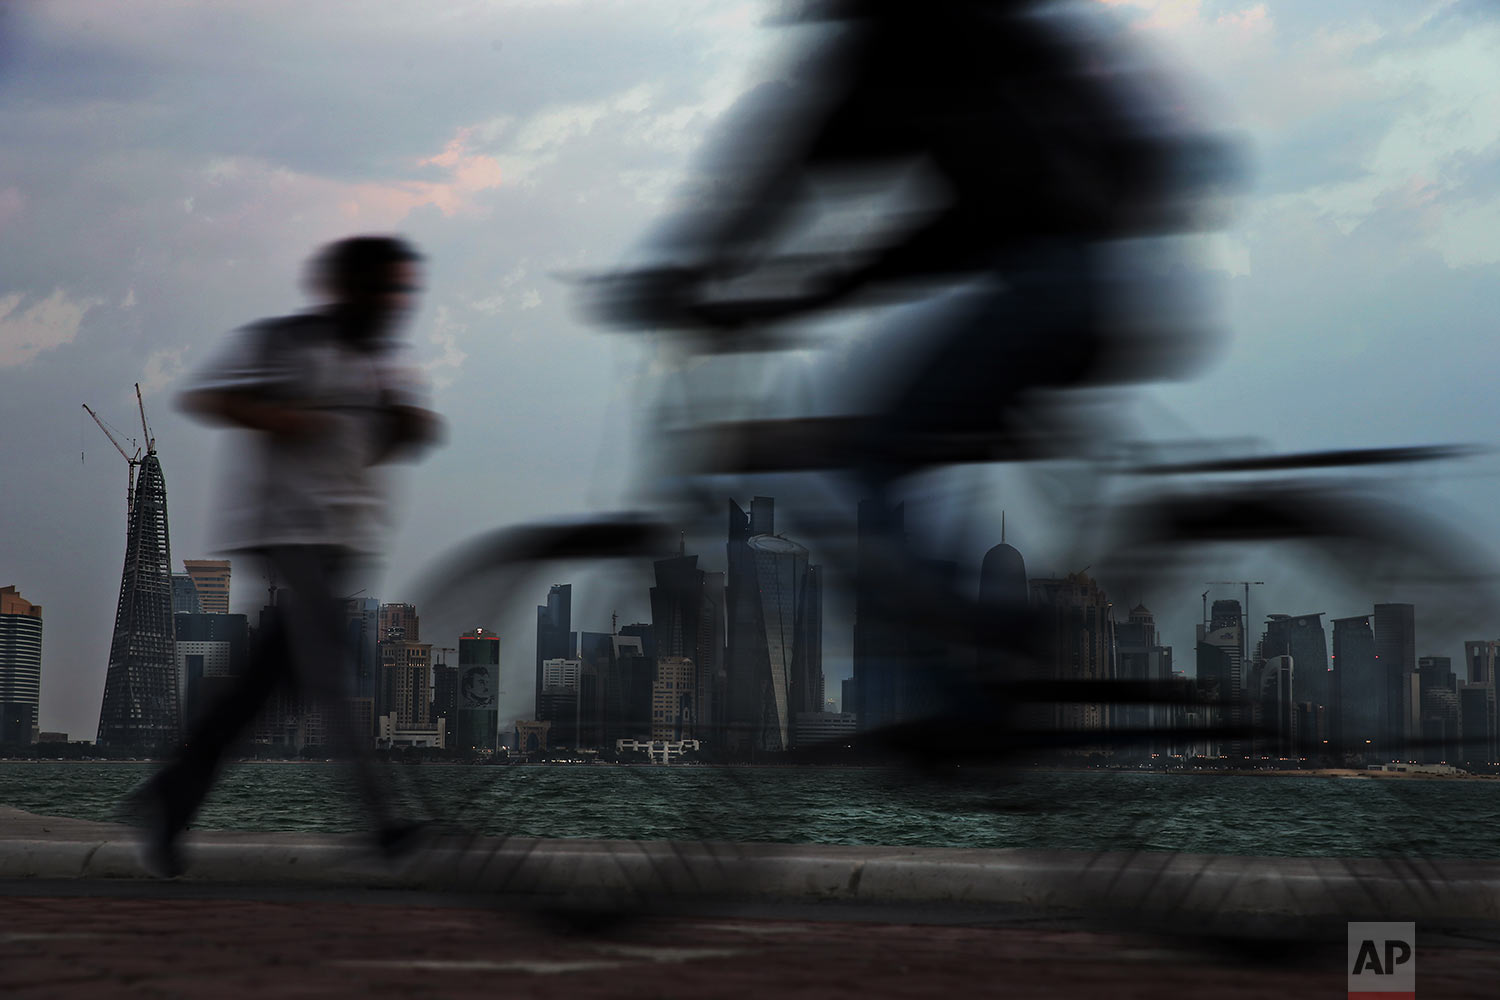  In this Sunday, Feb. 17, 2019 photo, people pass by the city skyline during their early morning workout in Doha, Qatar. (AP Photo/Kamran Jebreili) 